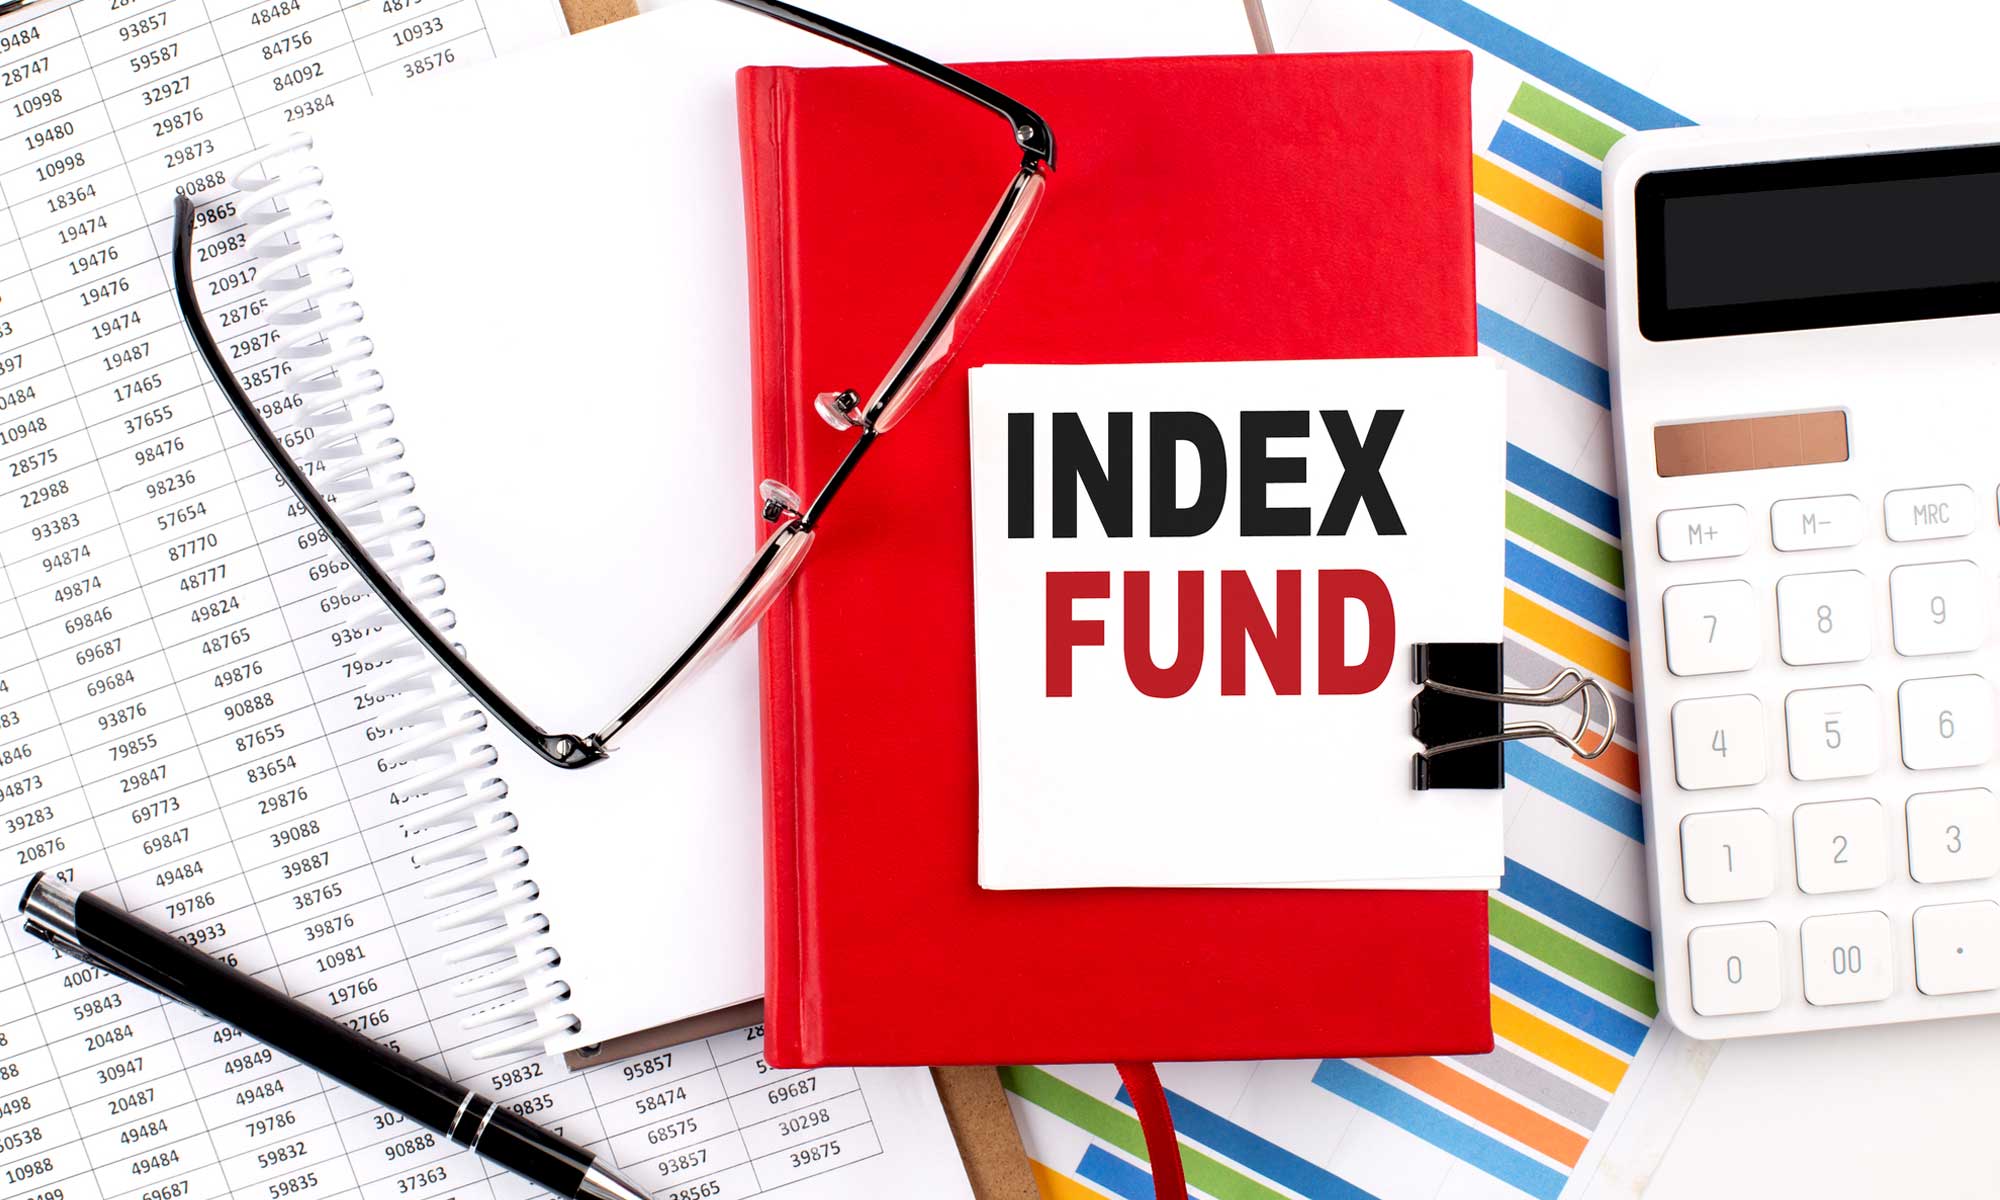 An index fund is a passively managed mutual fund.